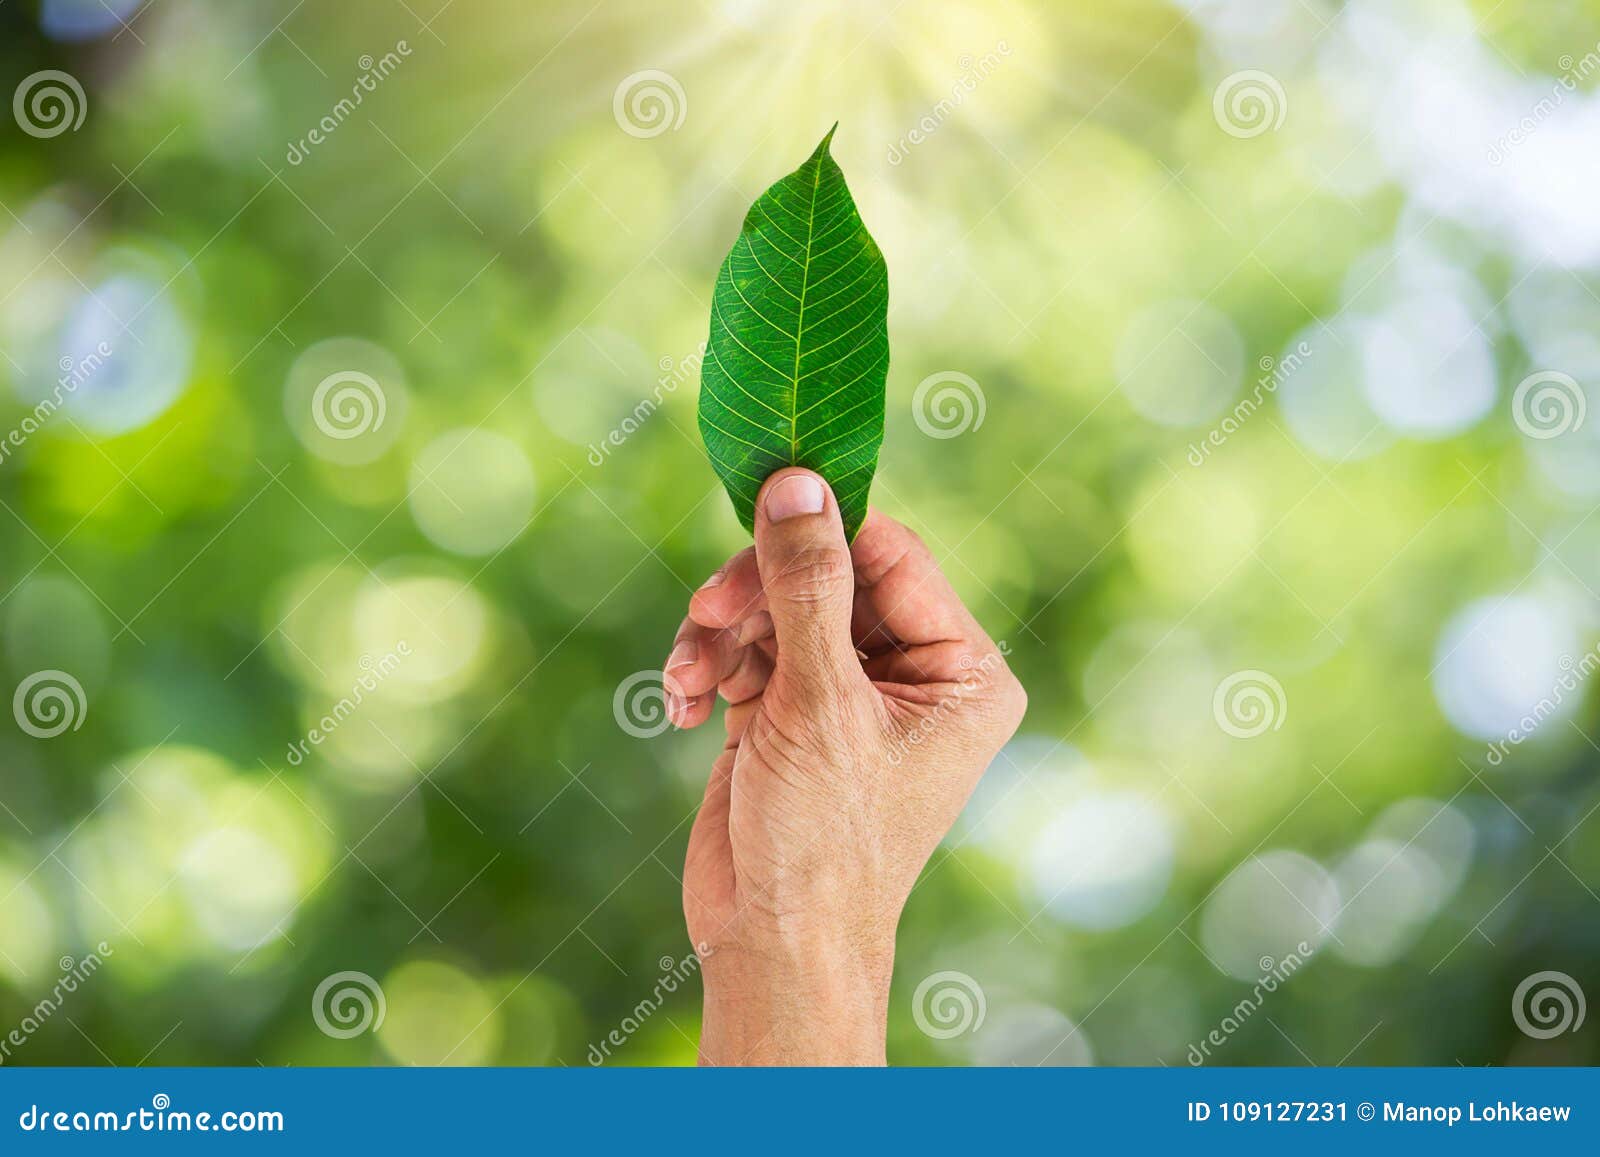 Man Hand Holding Green Leaf On Blurred Green Nature Bokeh Background